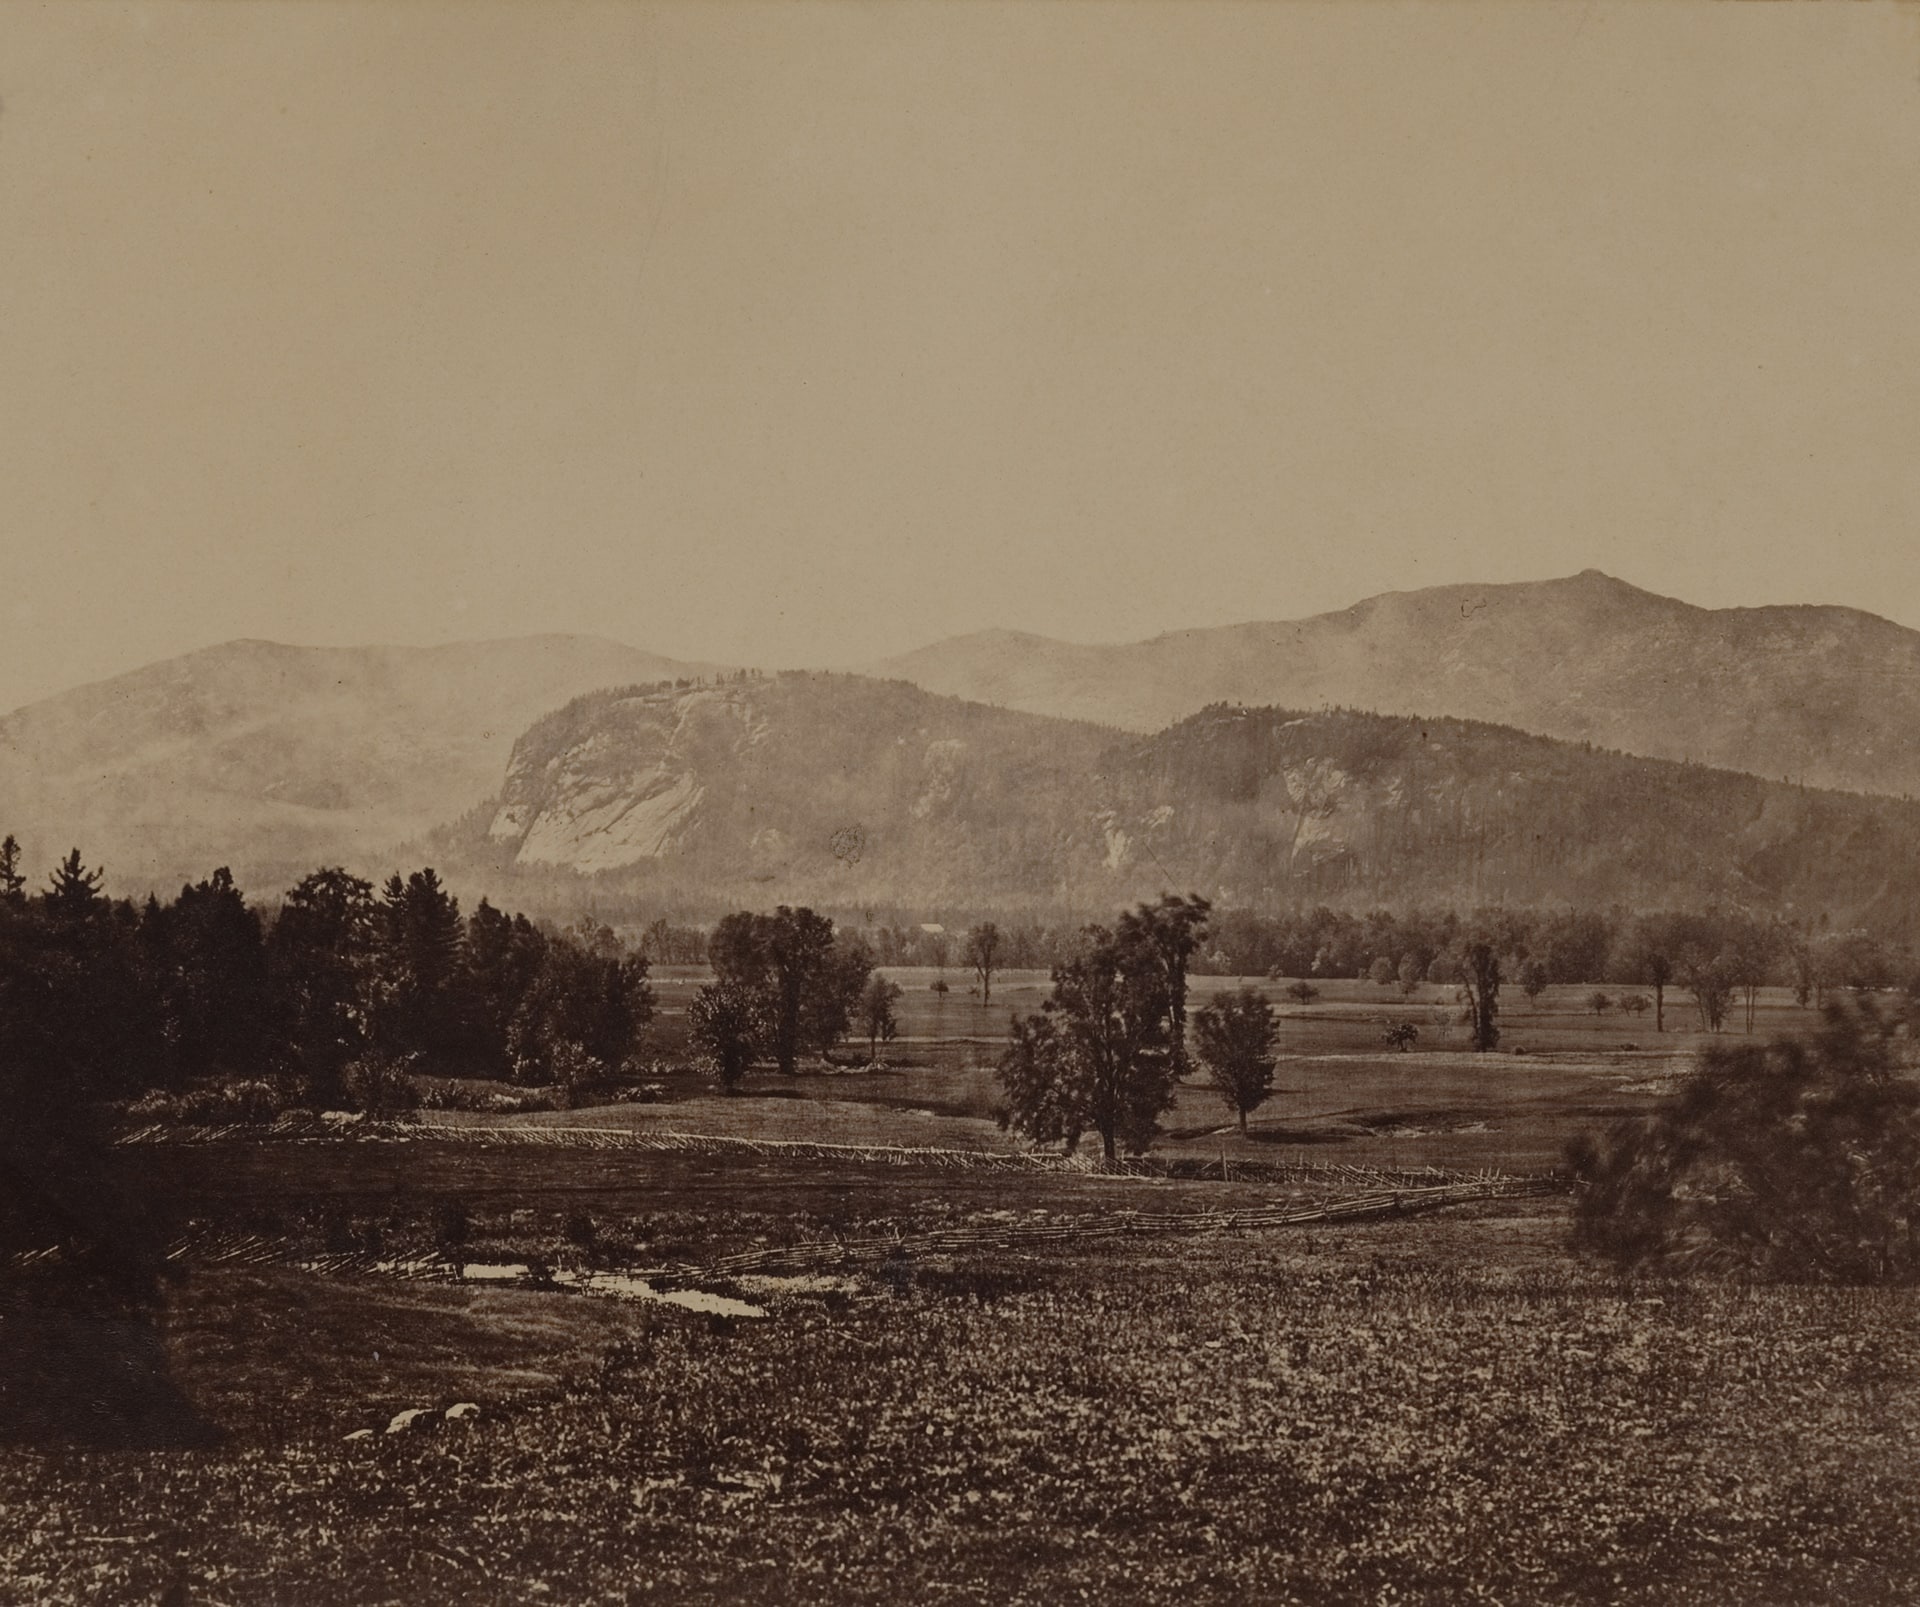 a sepia-toned photograph of a sparsely forested field with mountains in the background